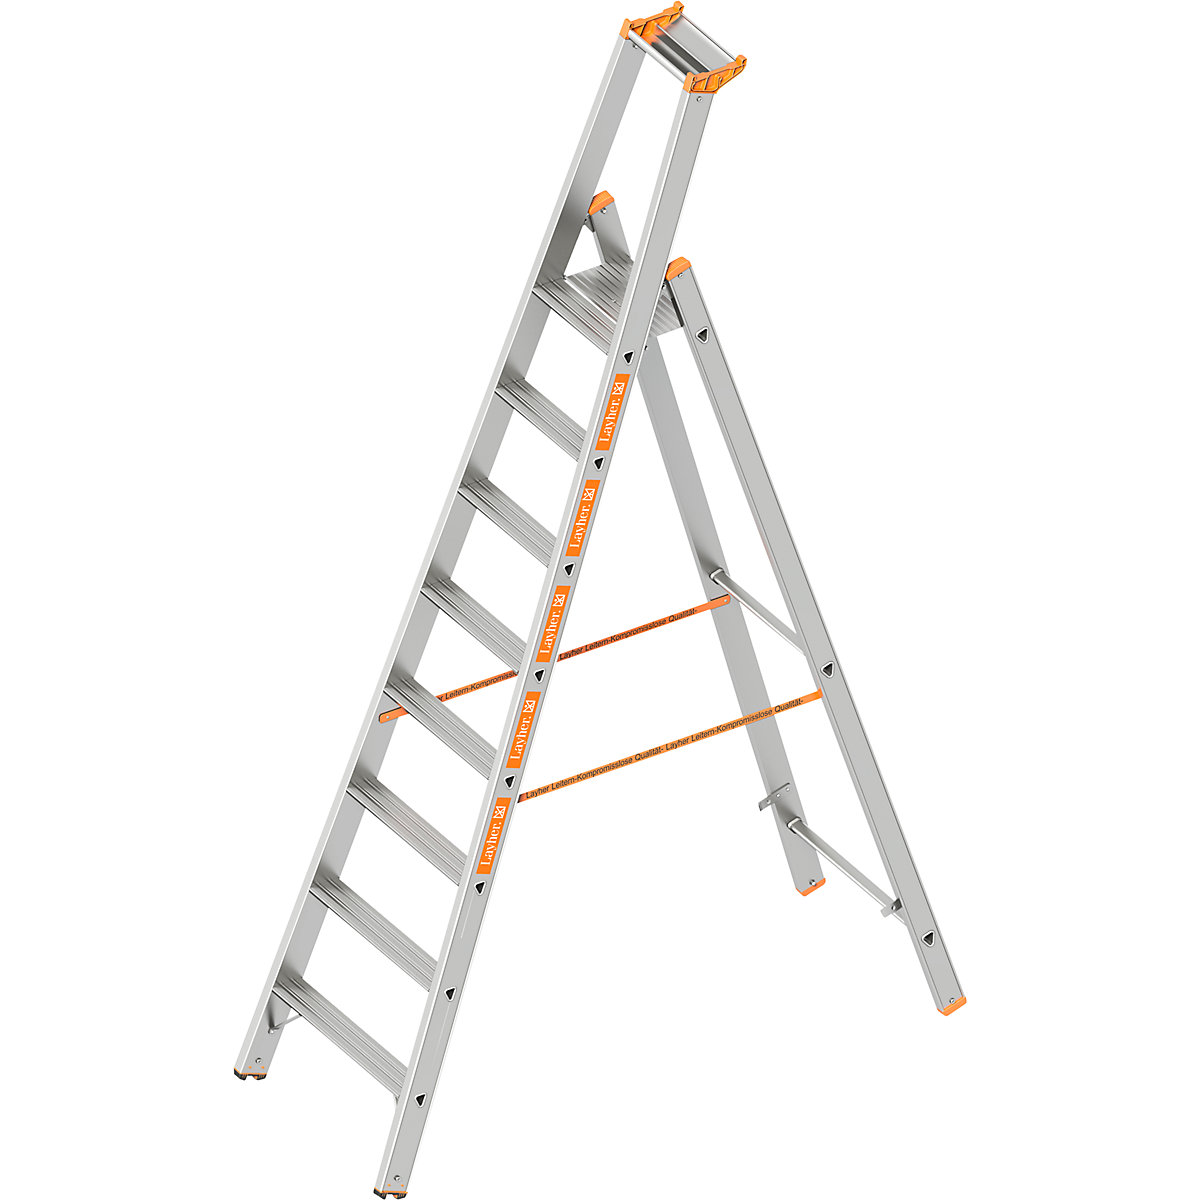 Step ladder – Layher, single sided access, 8 steps incl. platform-5